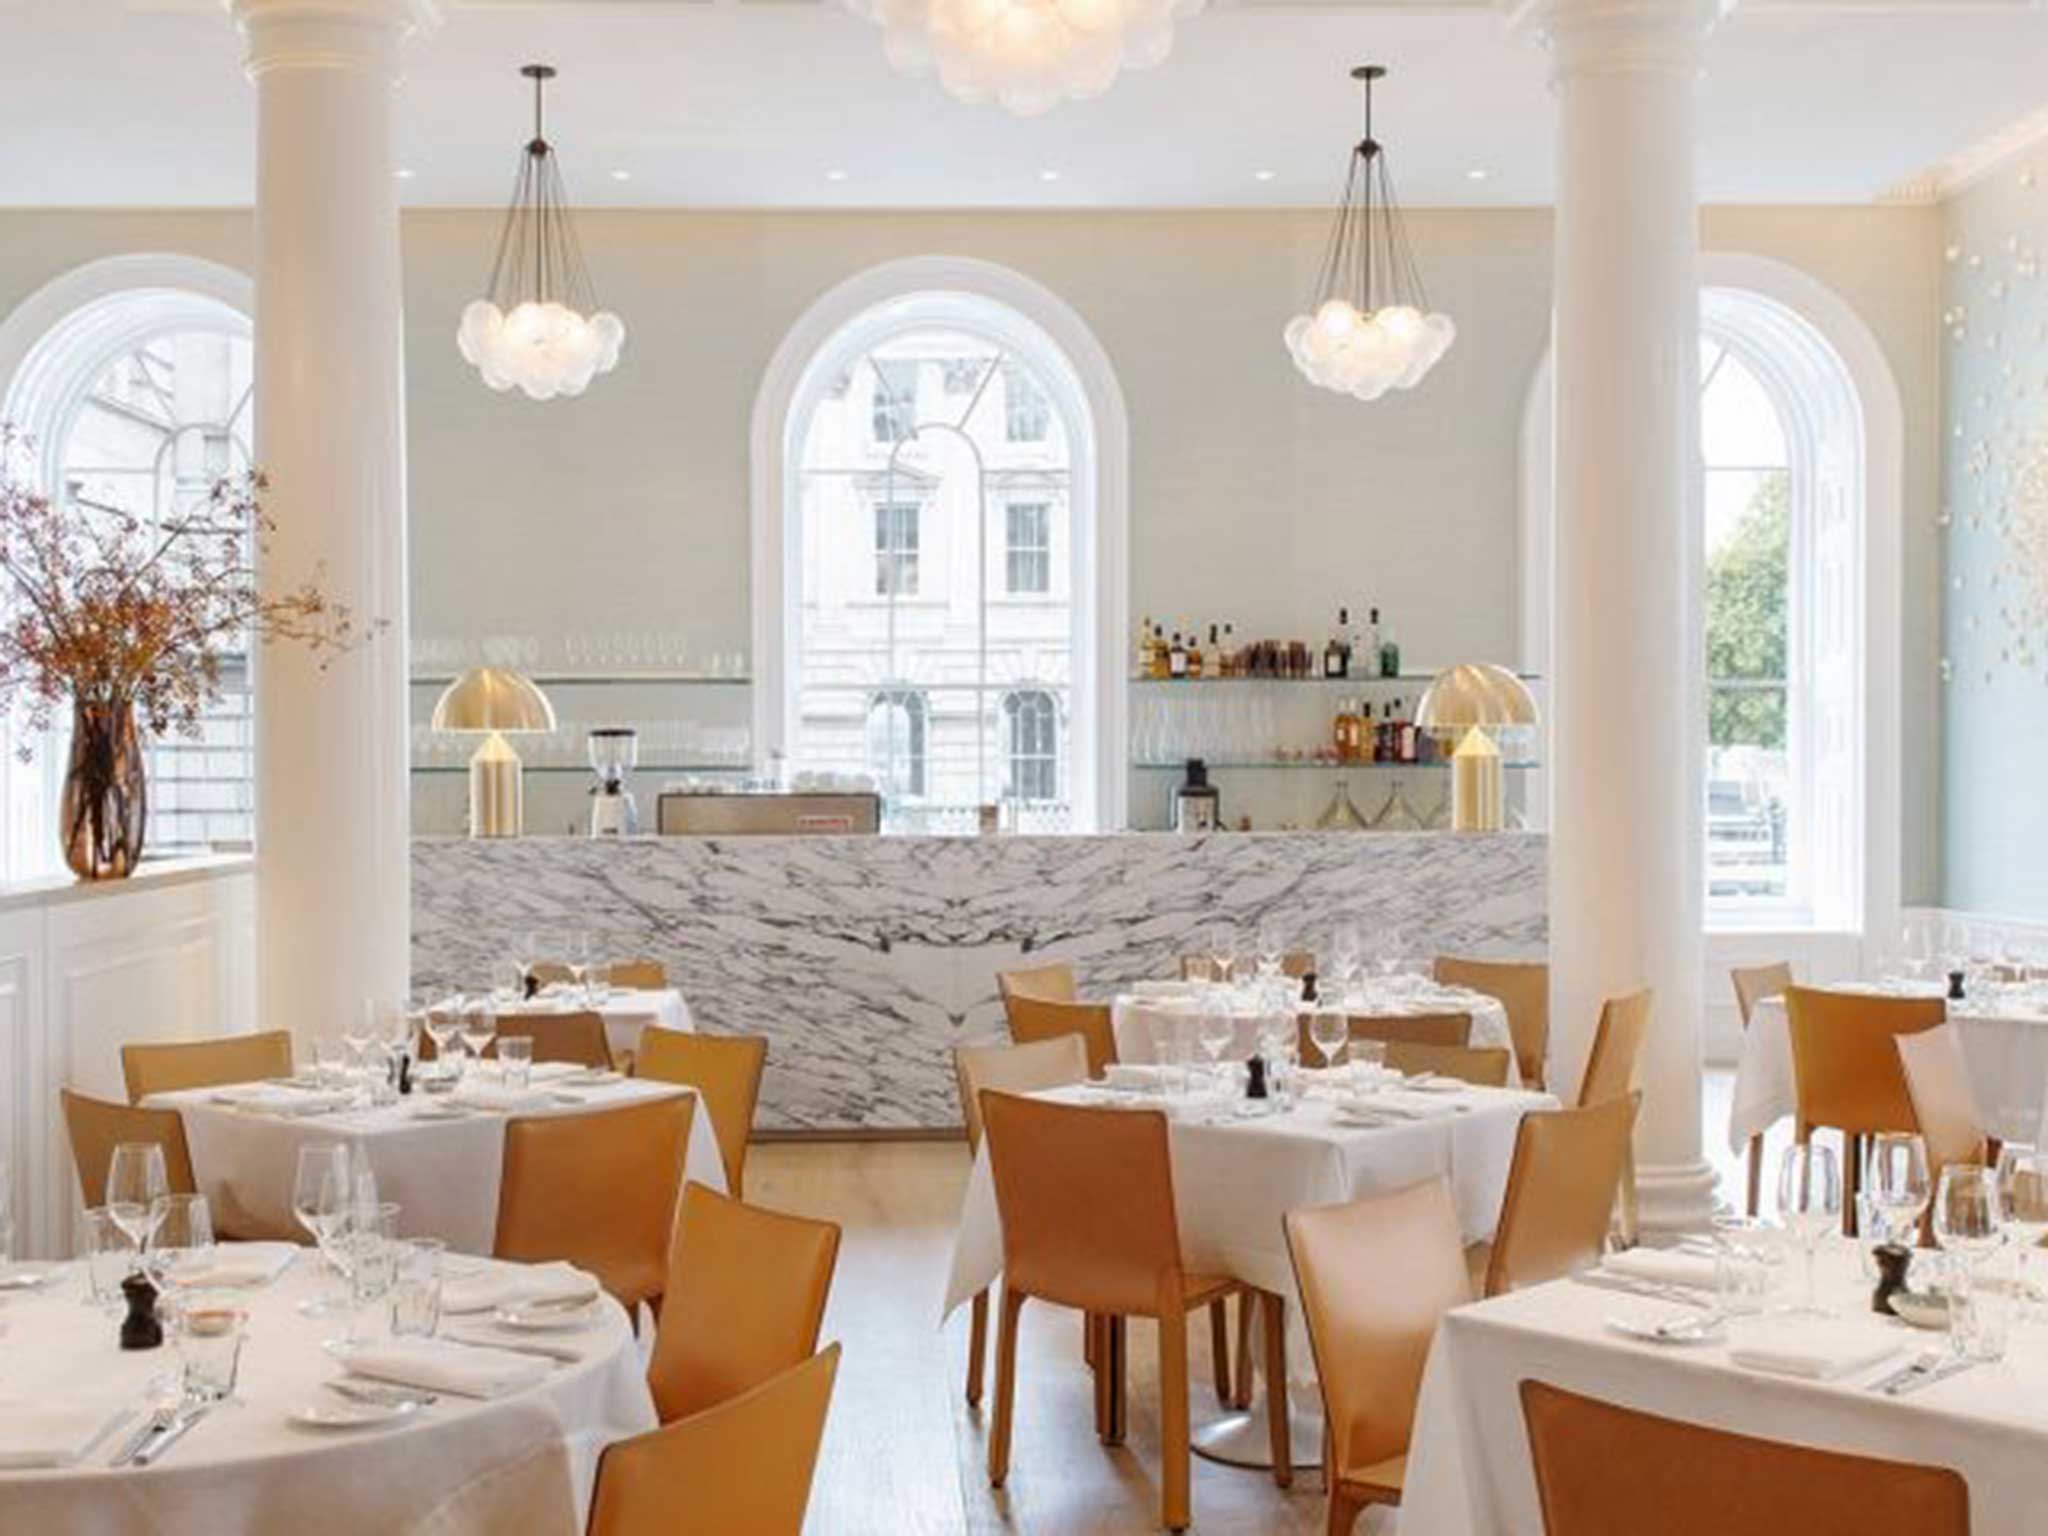 Top table: the beautiful dining room at Skye Gyngell’s Spring